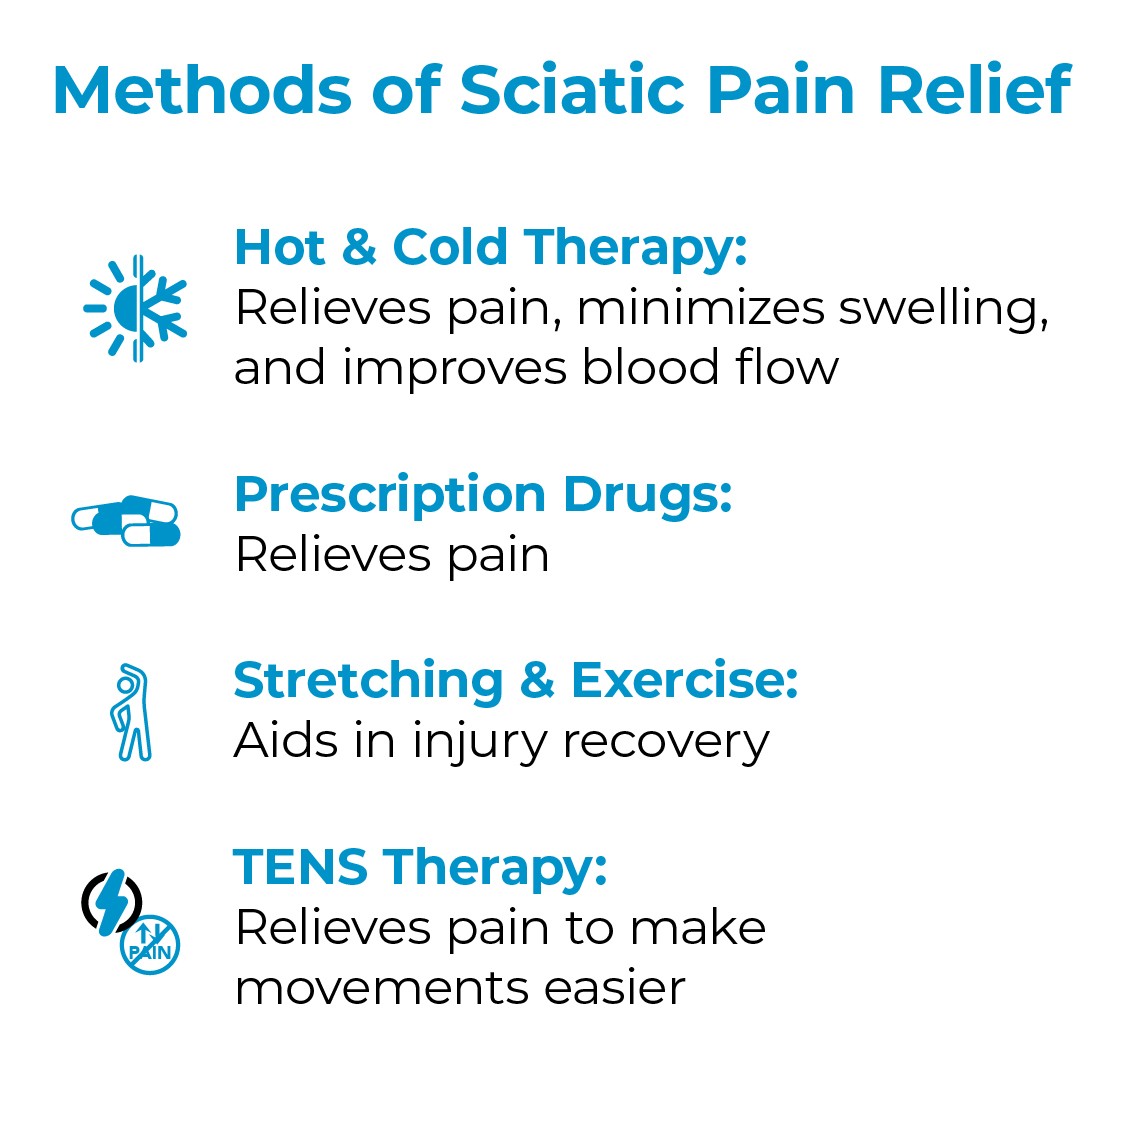 How to Use a TENS Unit for Sciatic Nerve Pain Relief 